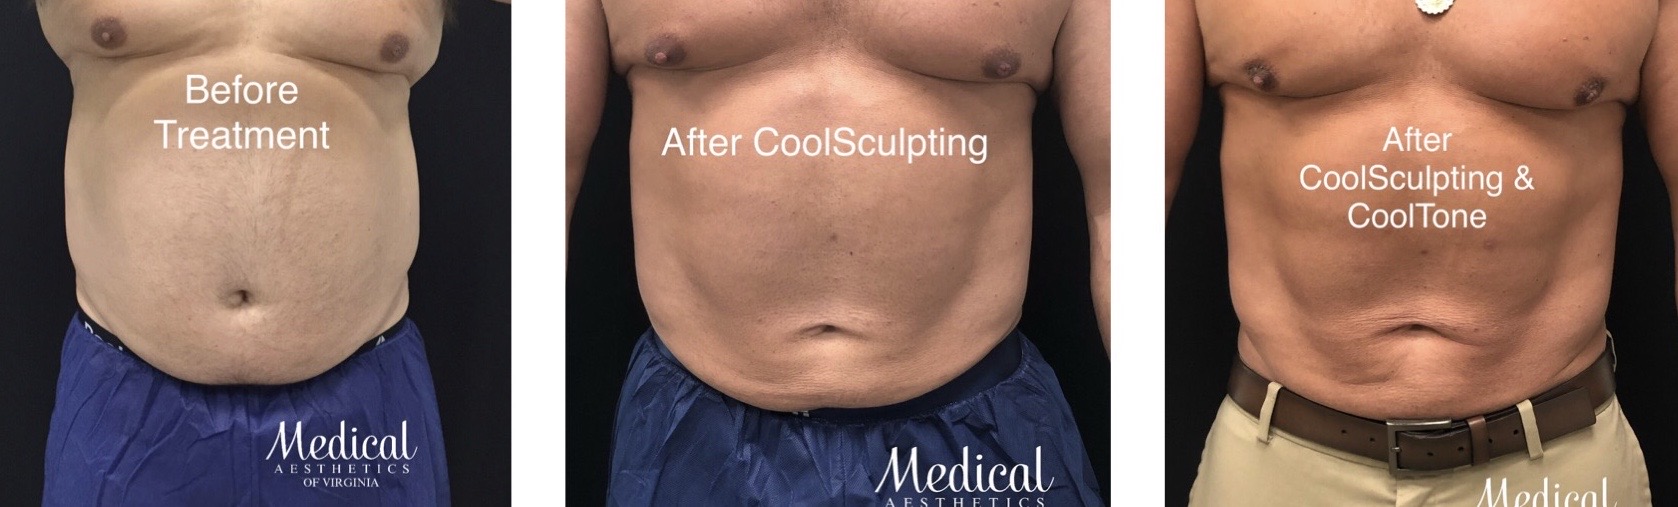 Is CoolSculpting Right for You? How Much Does Coolsculpting Cost